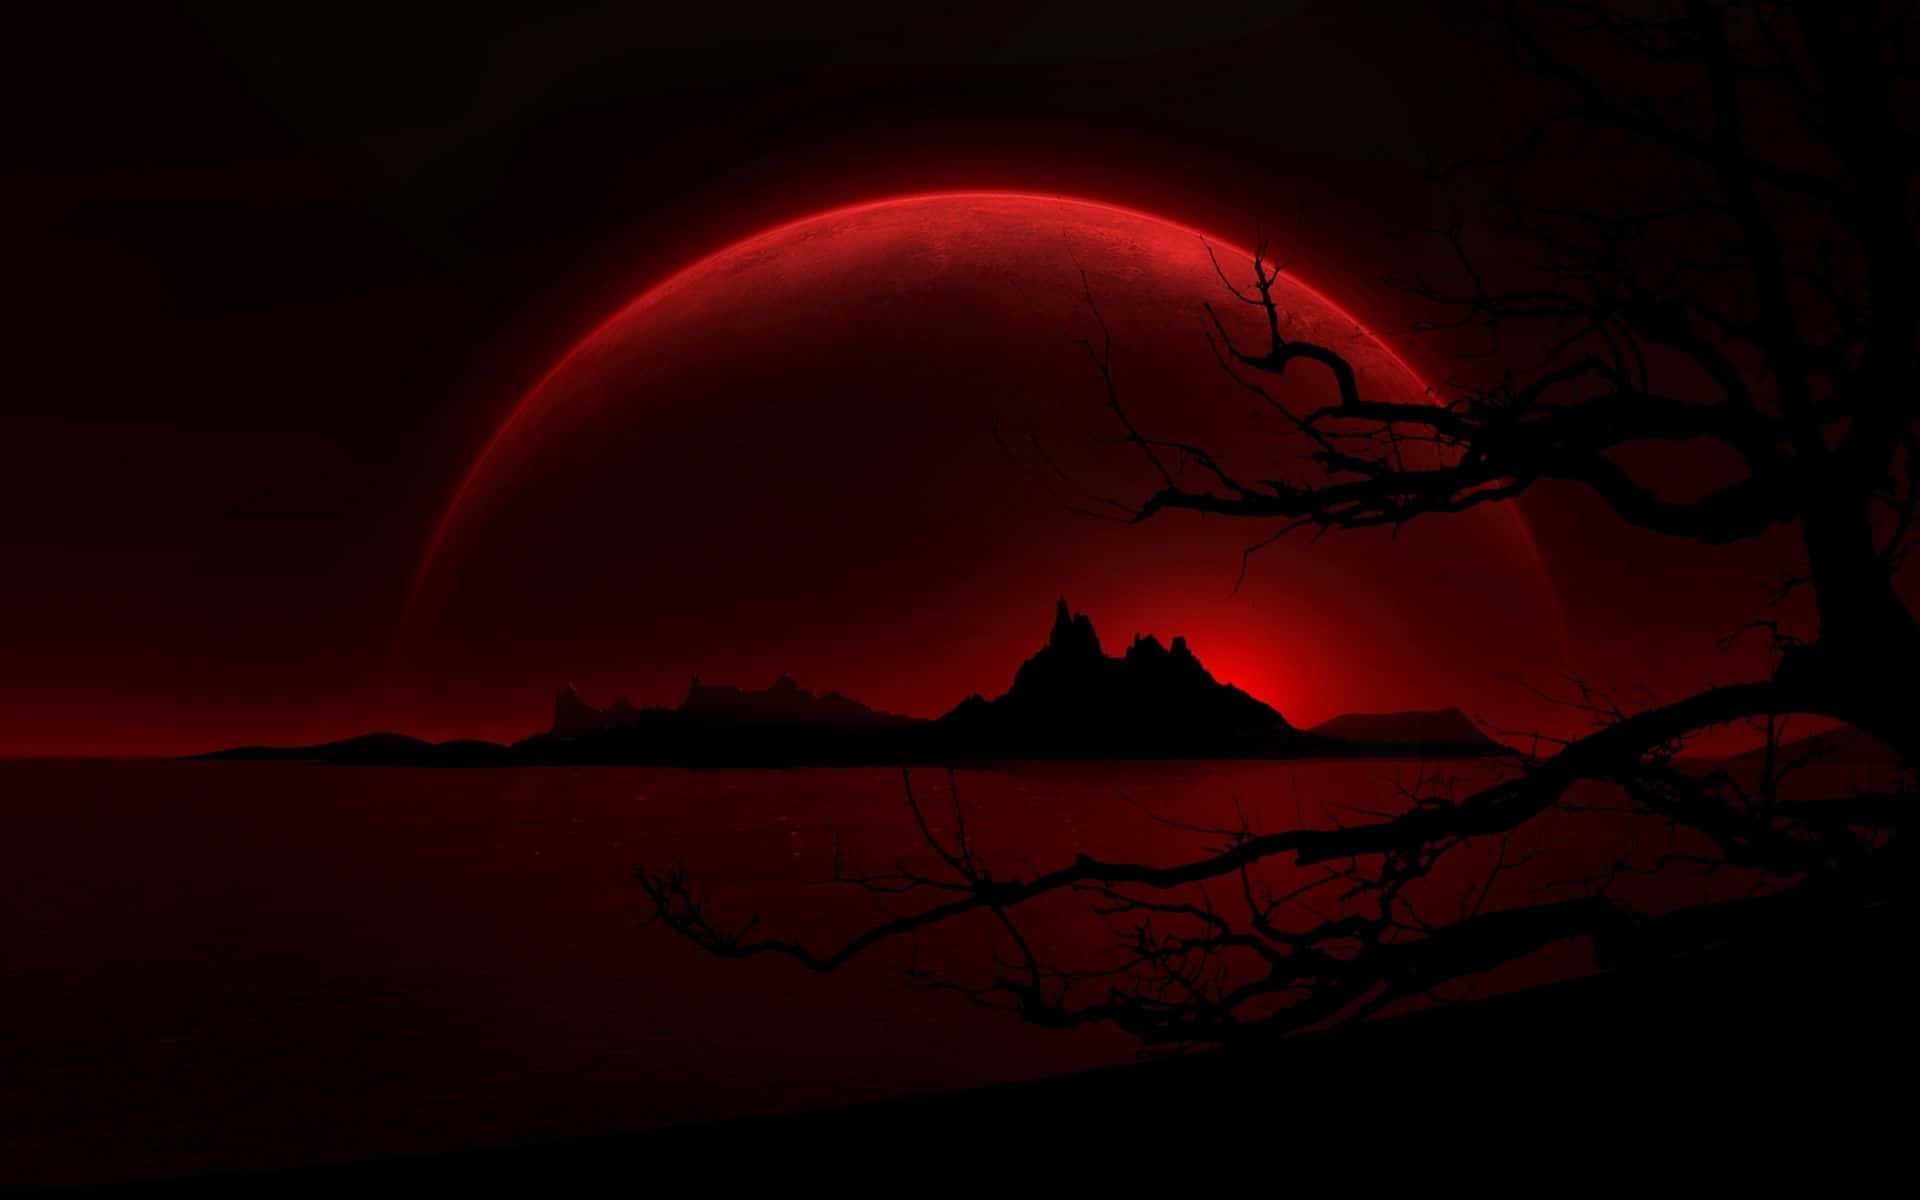 A Red Moon With A Tree In The Background